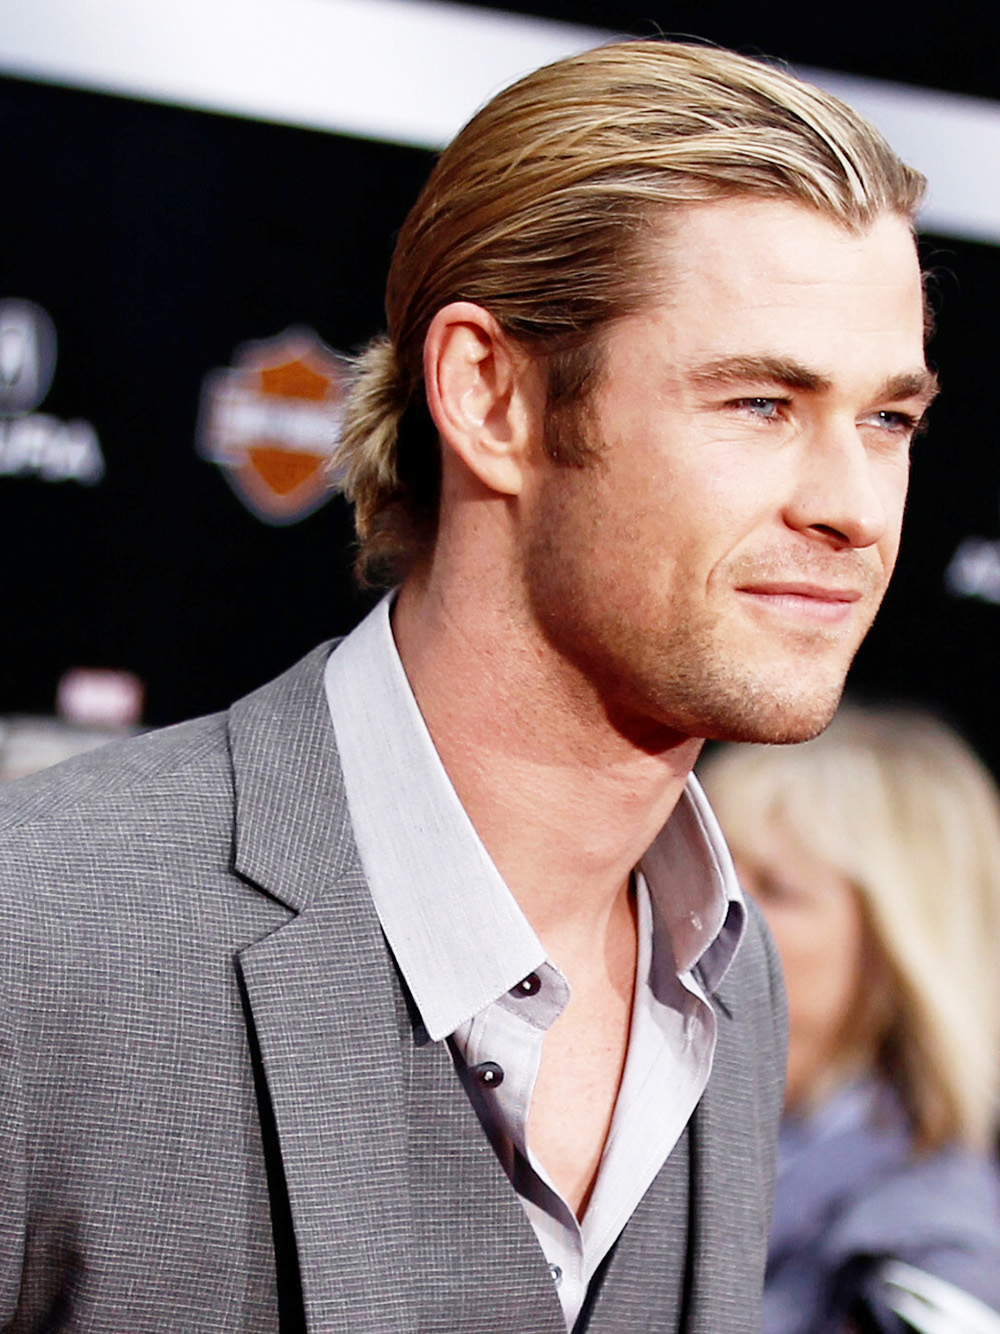 These Hairstyles From Chris Hemsworth Are Jaw-Dropping